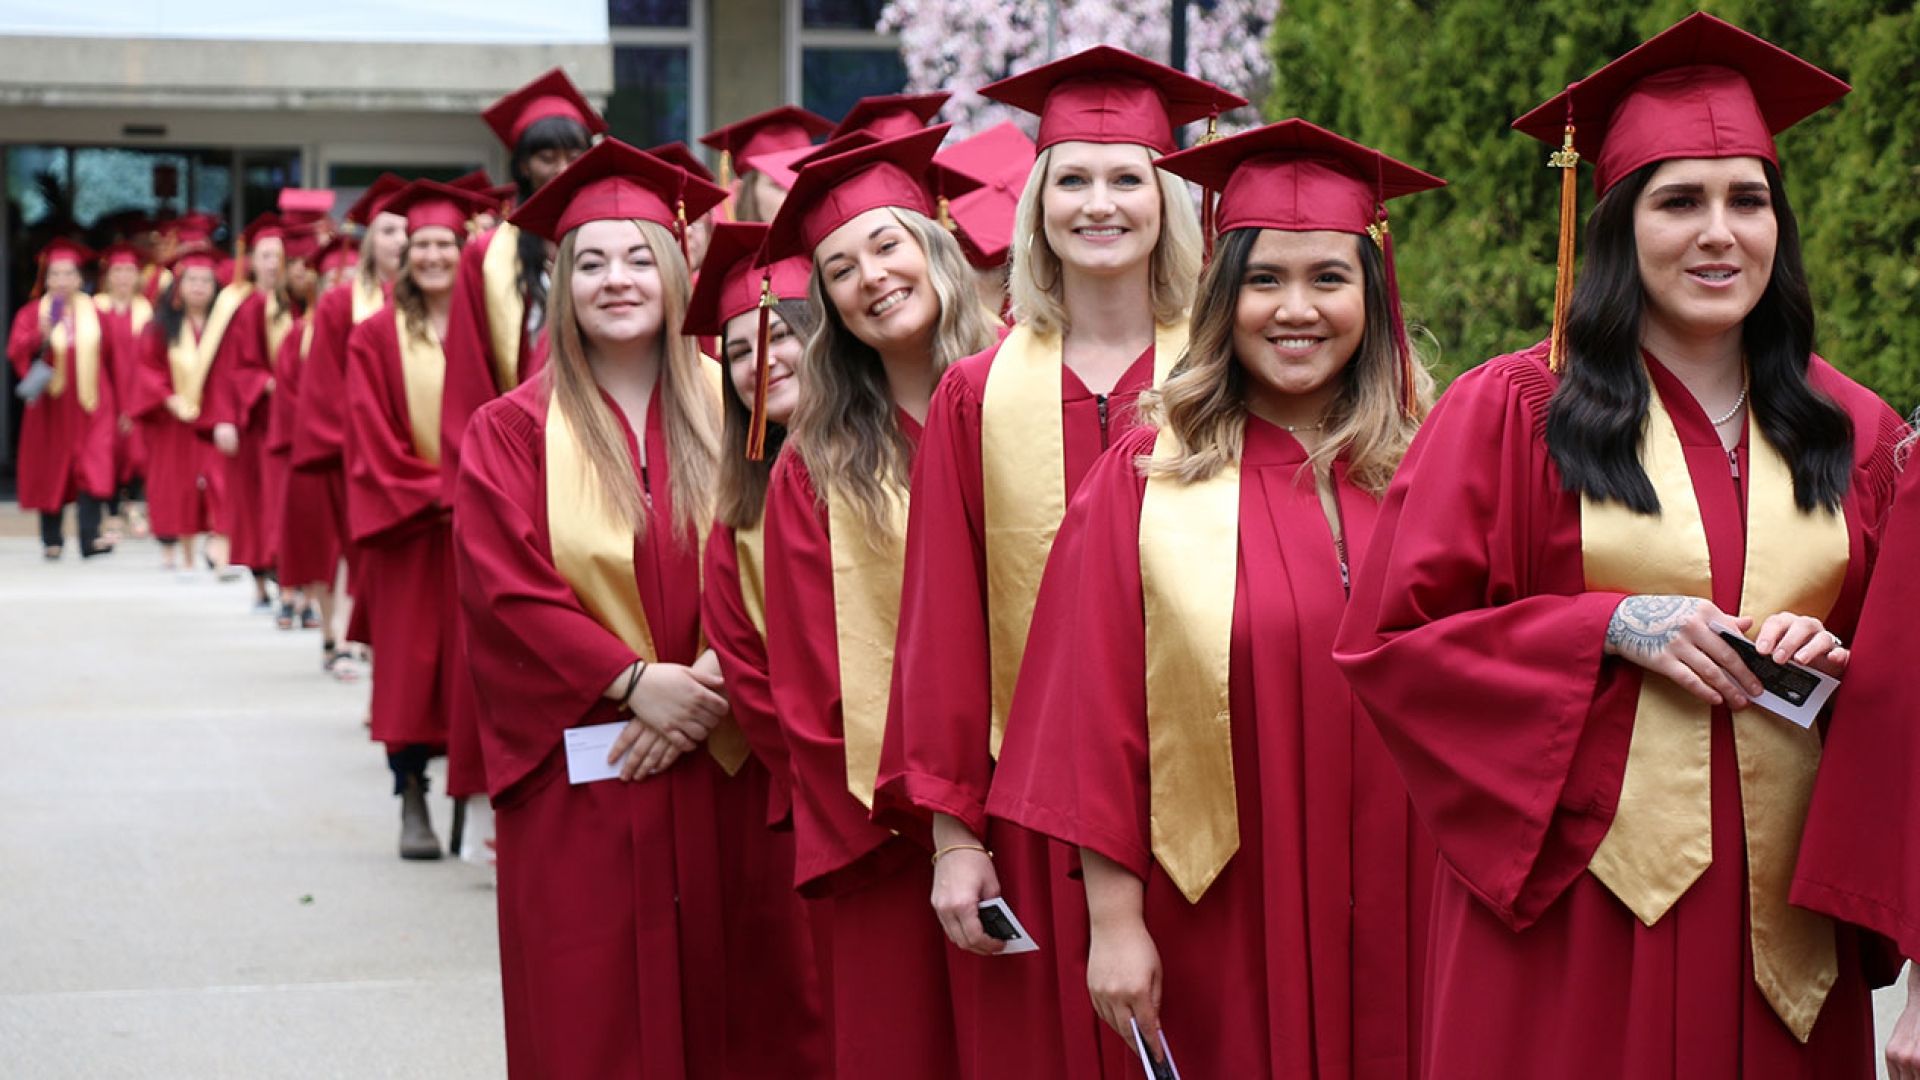 It was a year of getting back to being in-person at Selkirk College. In the first graduation ceremony on the Castlegar Campus since 2019, students were all smiles at Convocation 2022 that was held in late-April.